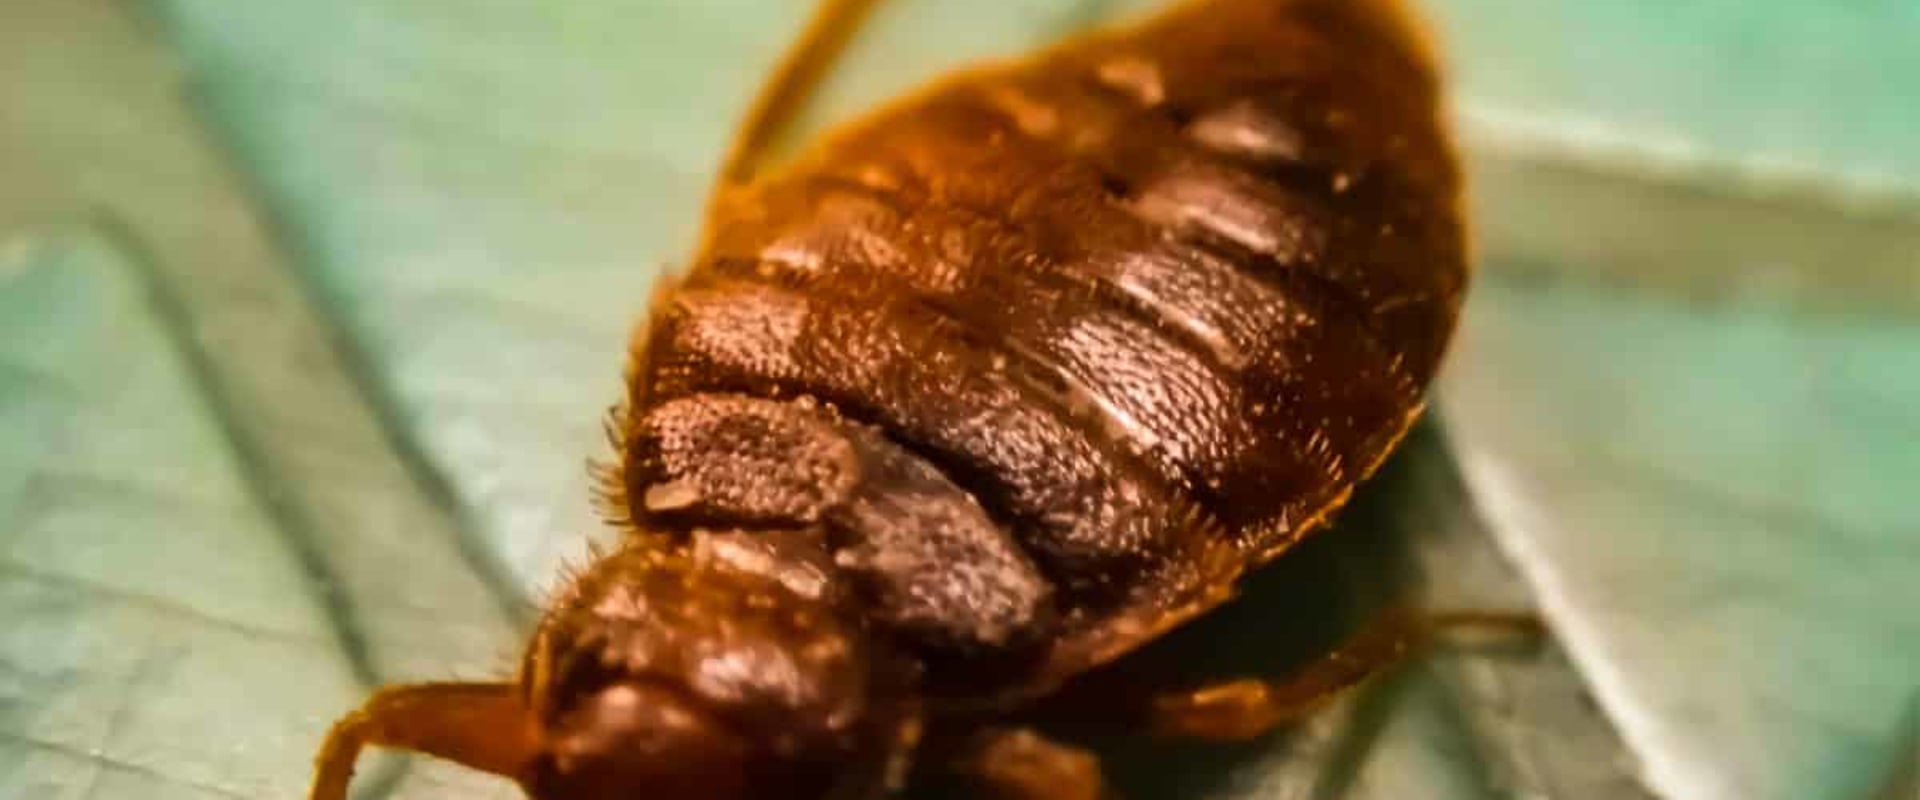 Do bed bugs come back after extermination?